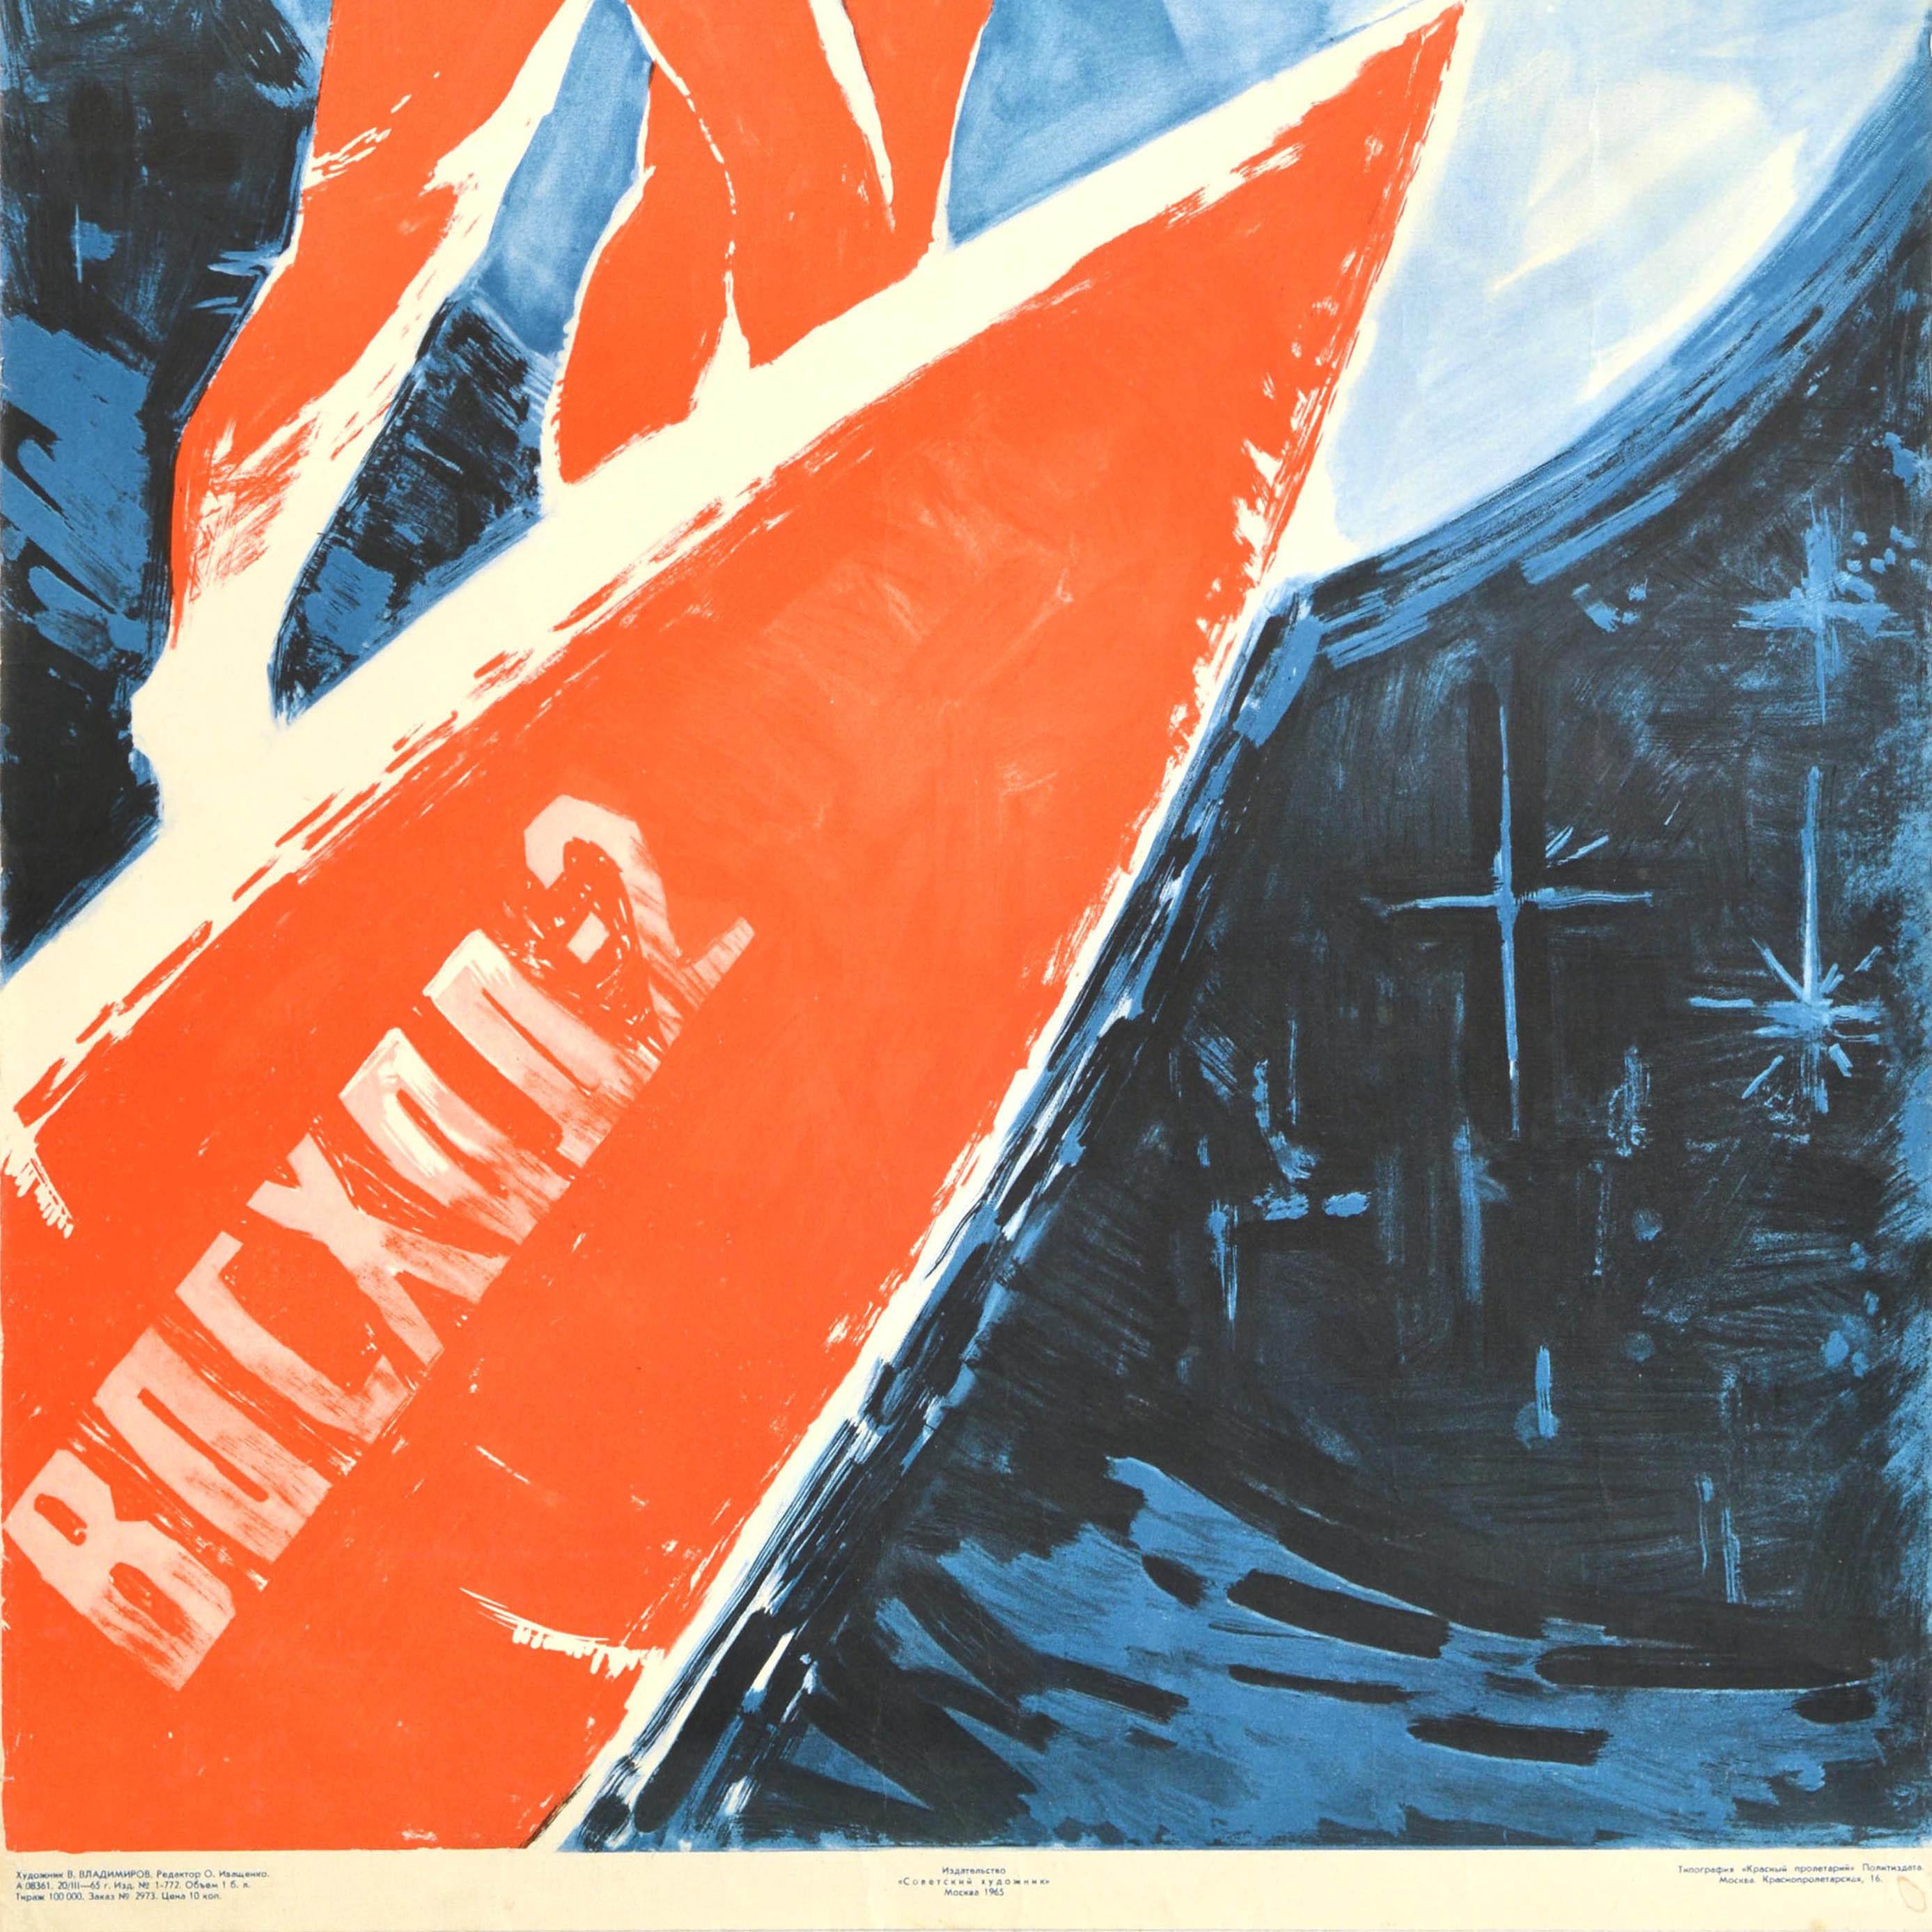 Original Vintage Soviet Propaganda Poster We Are Ahead On The Space March USSR - Gray Print by Unknown